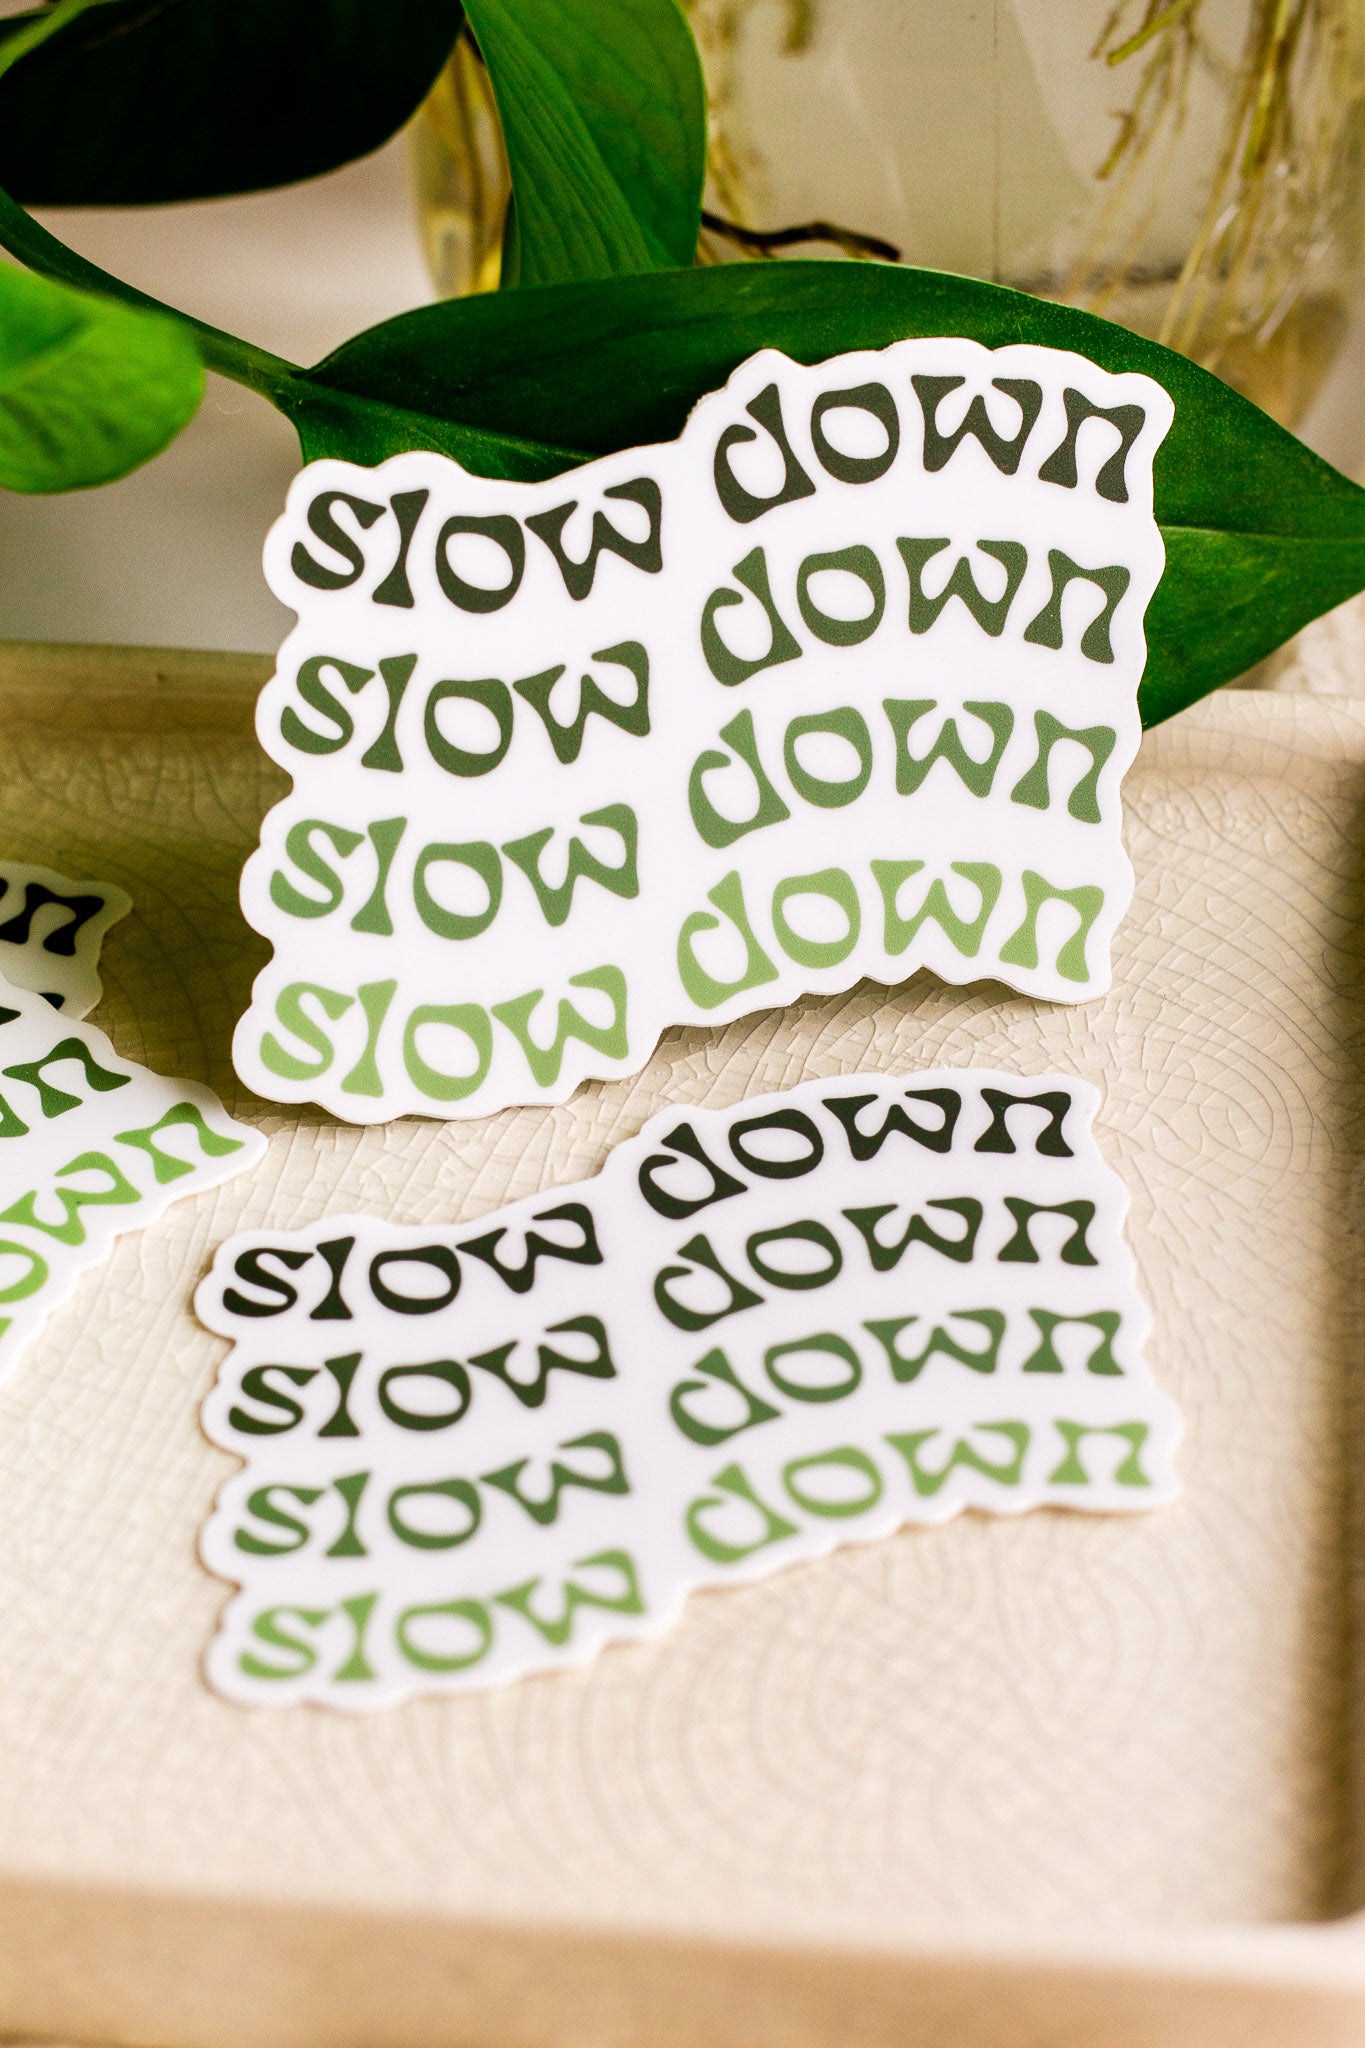 Slow Down Vinyl Sticker leaning against a house plant